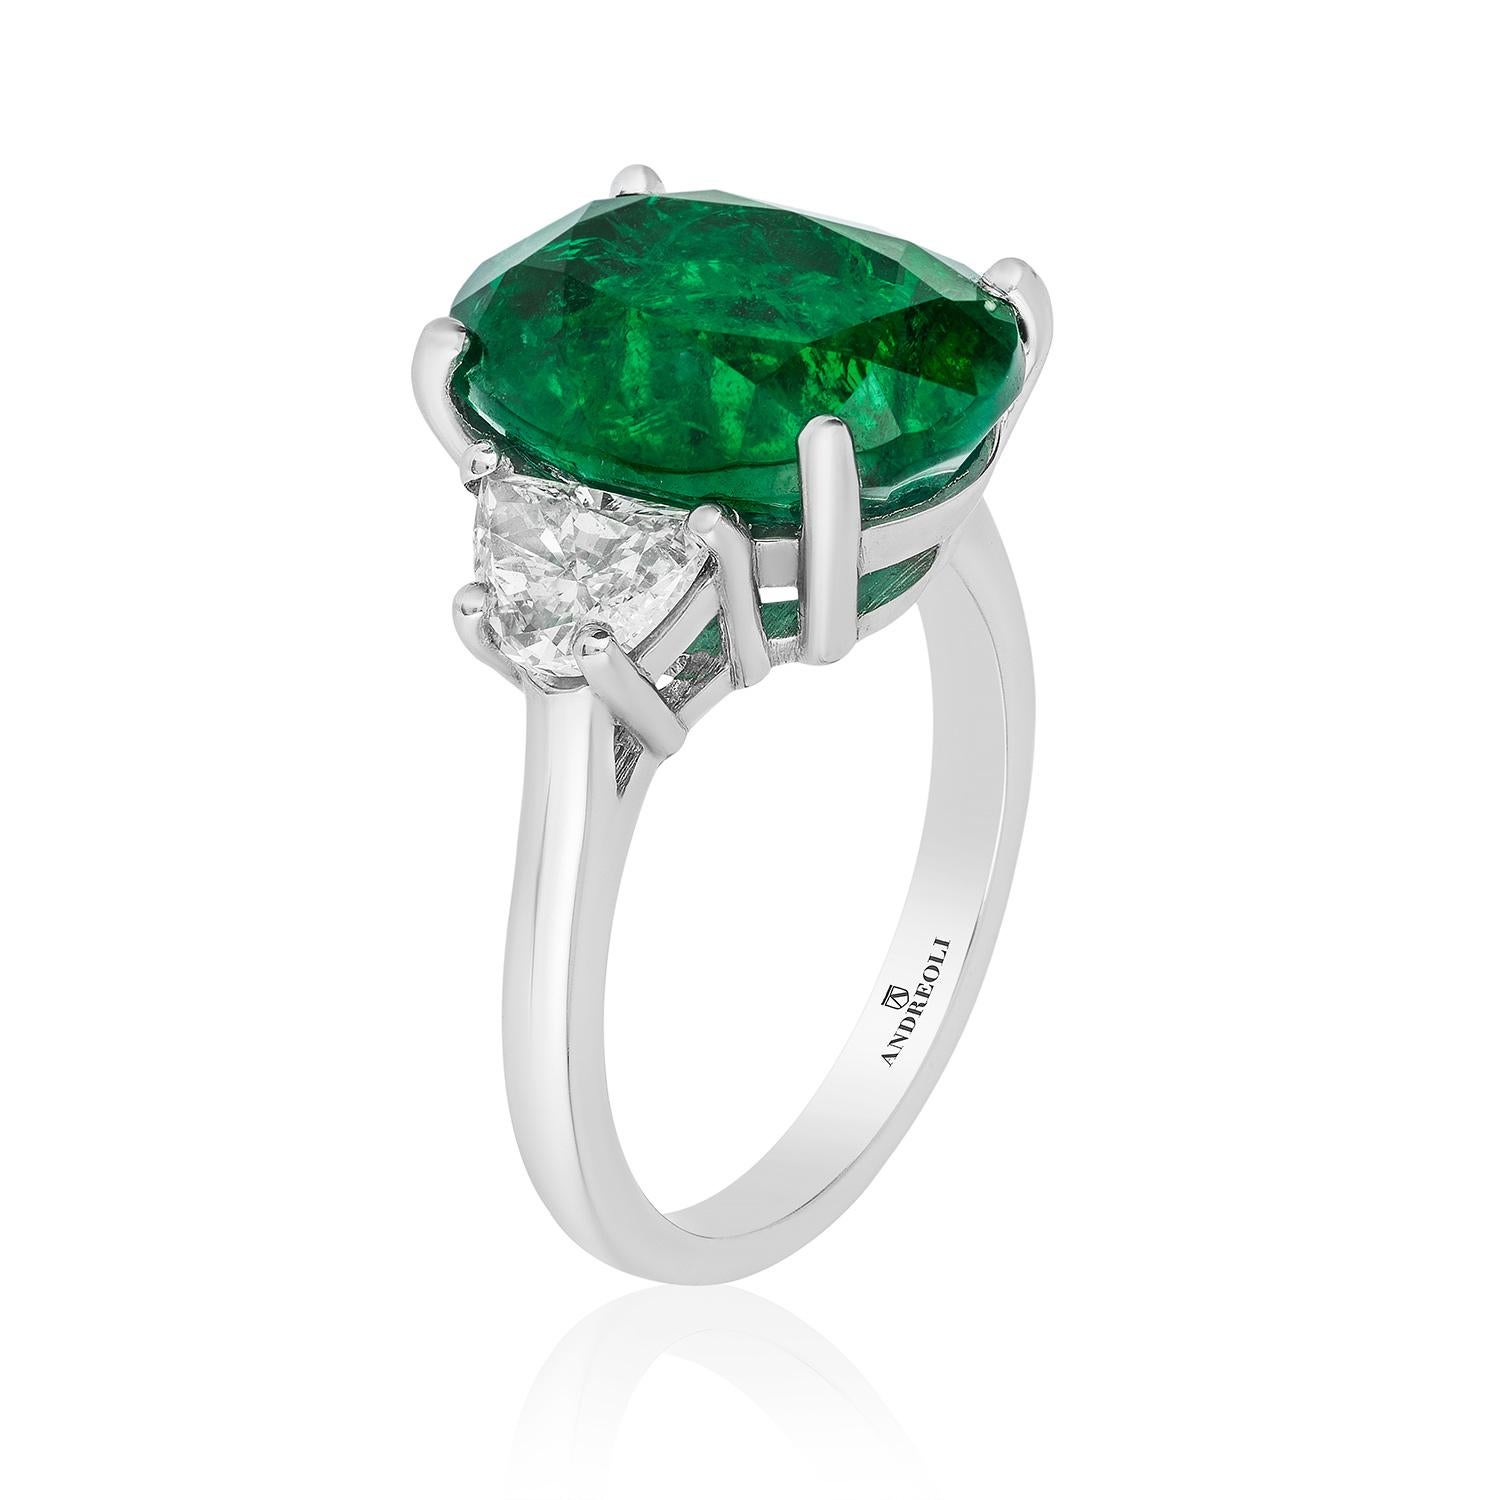 Andreoli 7.06 Carat CDC Certified Emerald Diamond Ring Platinum. this ring features a 7.06 carat vivid green zambian origin minor oil emerald certified by CDC Switzerland. Two Trapezoid diamonds 1.10 carat, Set in Platinum. Made in the USA by